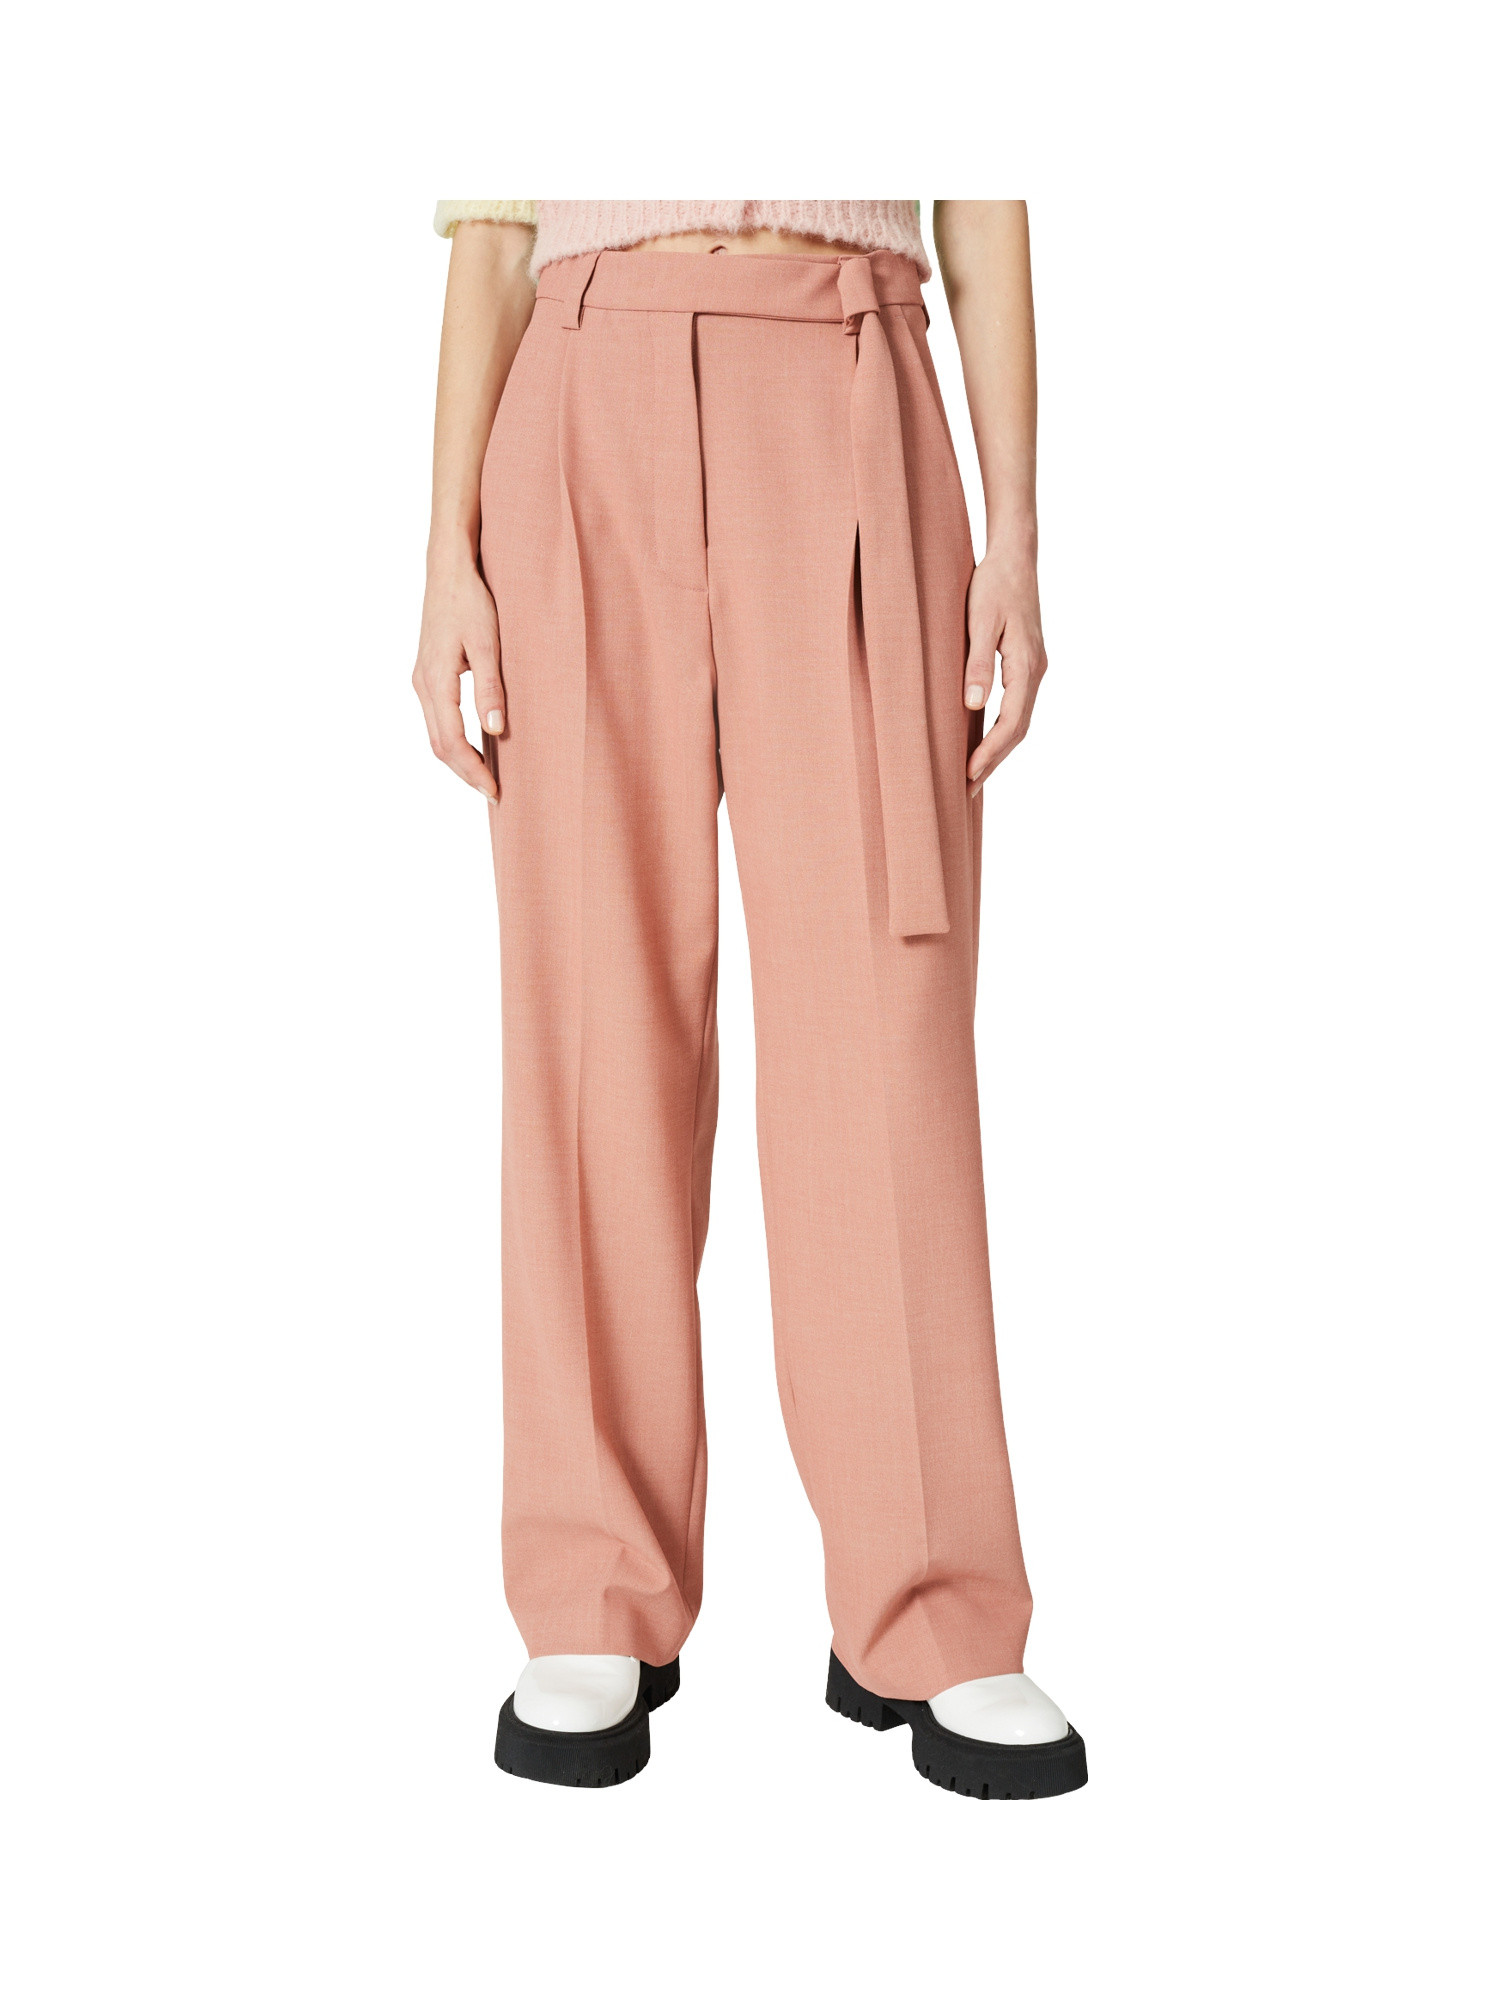 Multicolor pied de poule trousers in polyester-viscose blend with wide leg, Pink, large image number 7